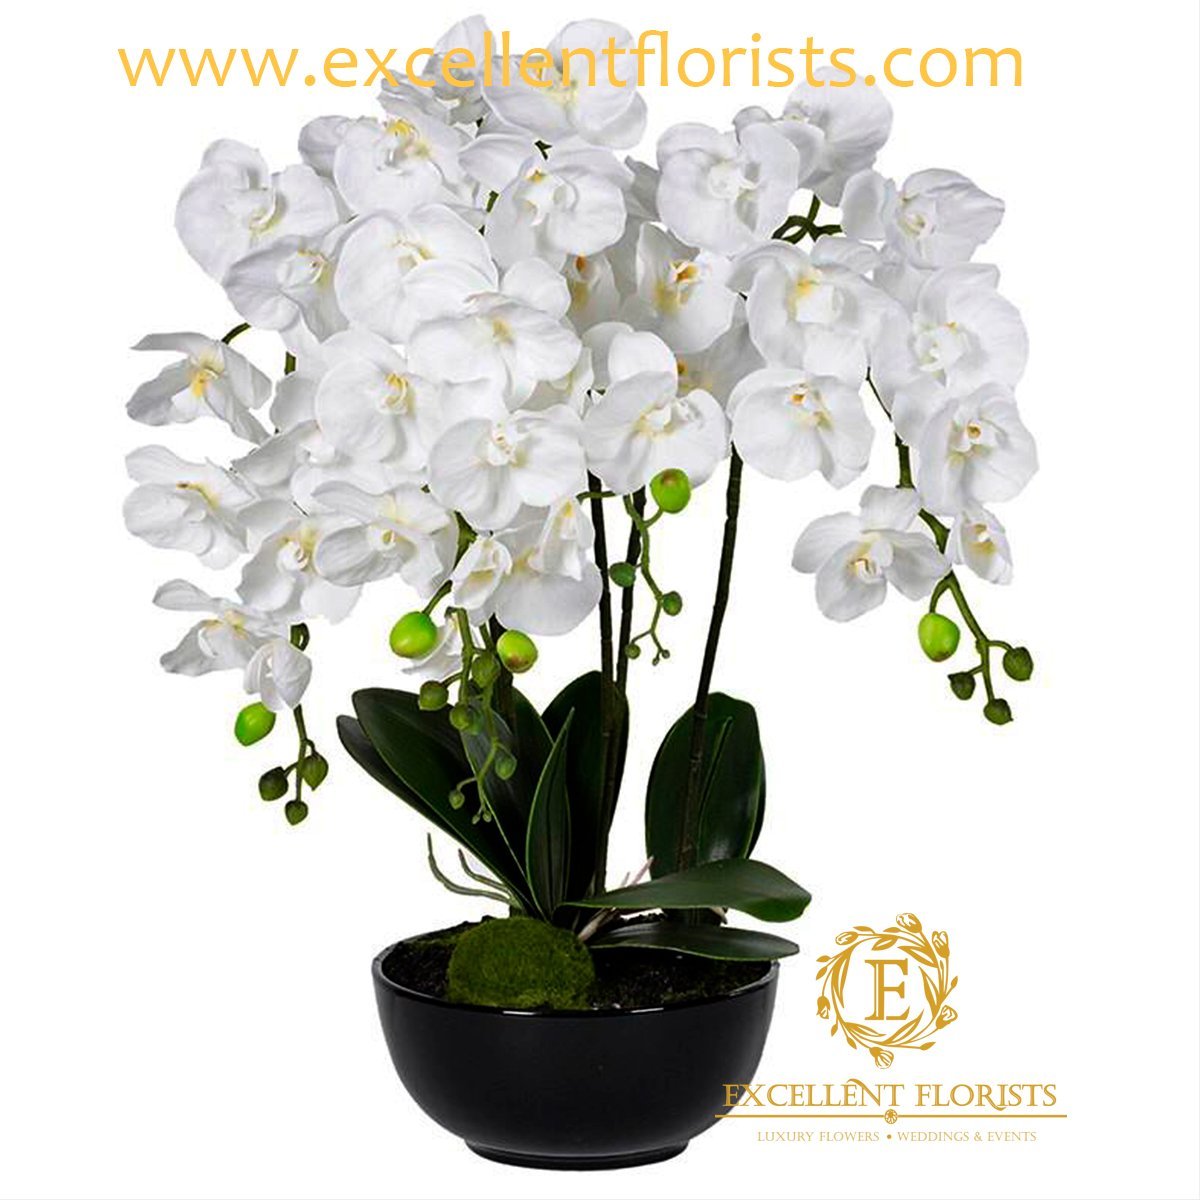 Pure White Orchids on a wonderful vase